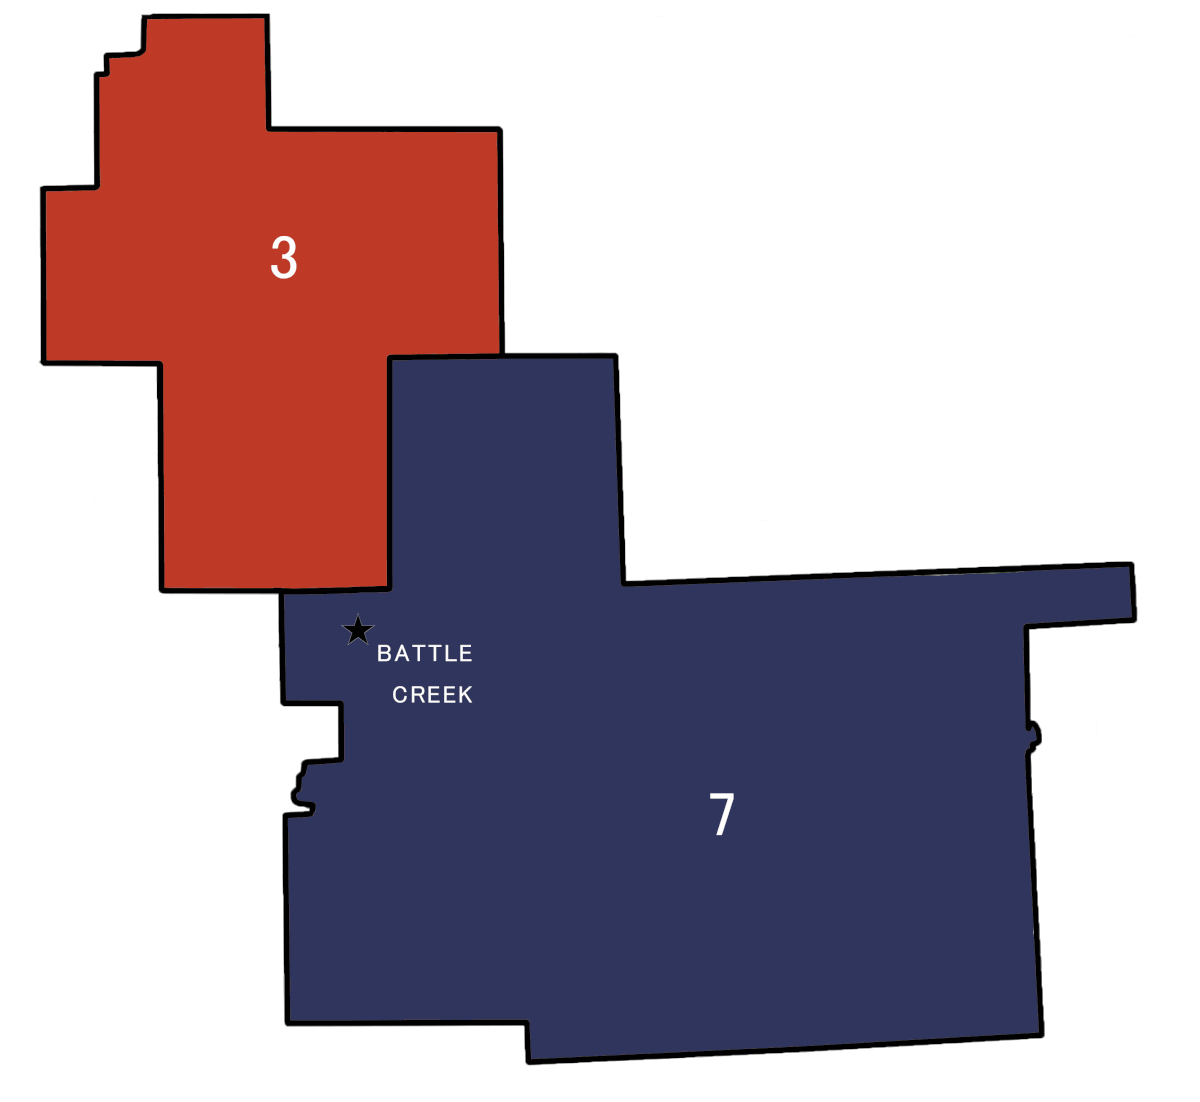 This map depicts the change in Michigan's 3rd and 7th congressional voting districts from 2001 to 2011. 